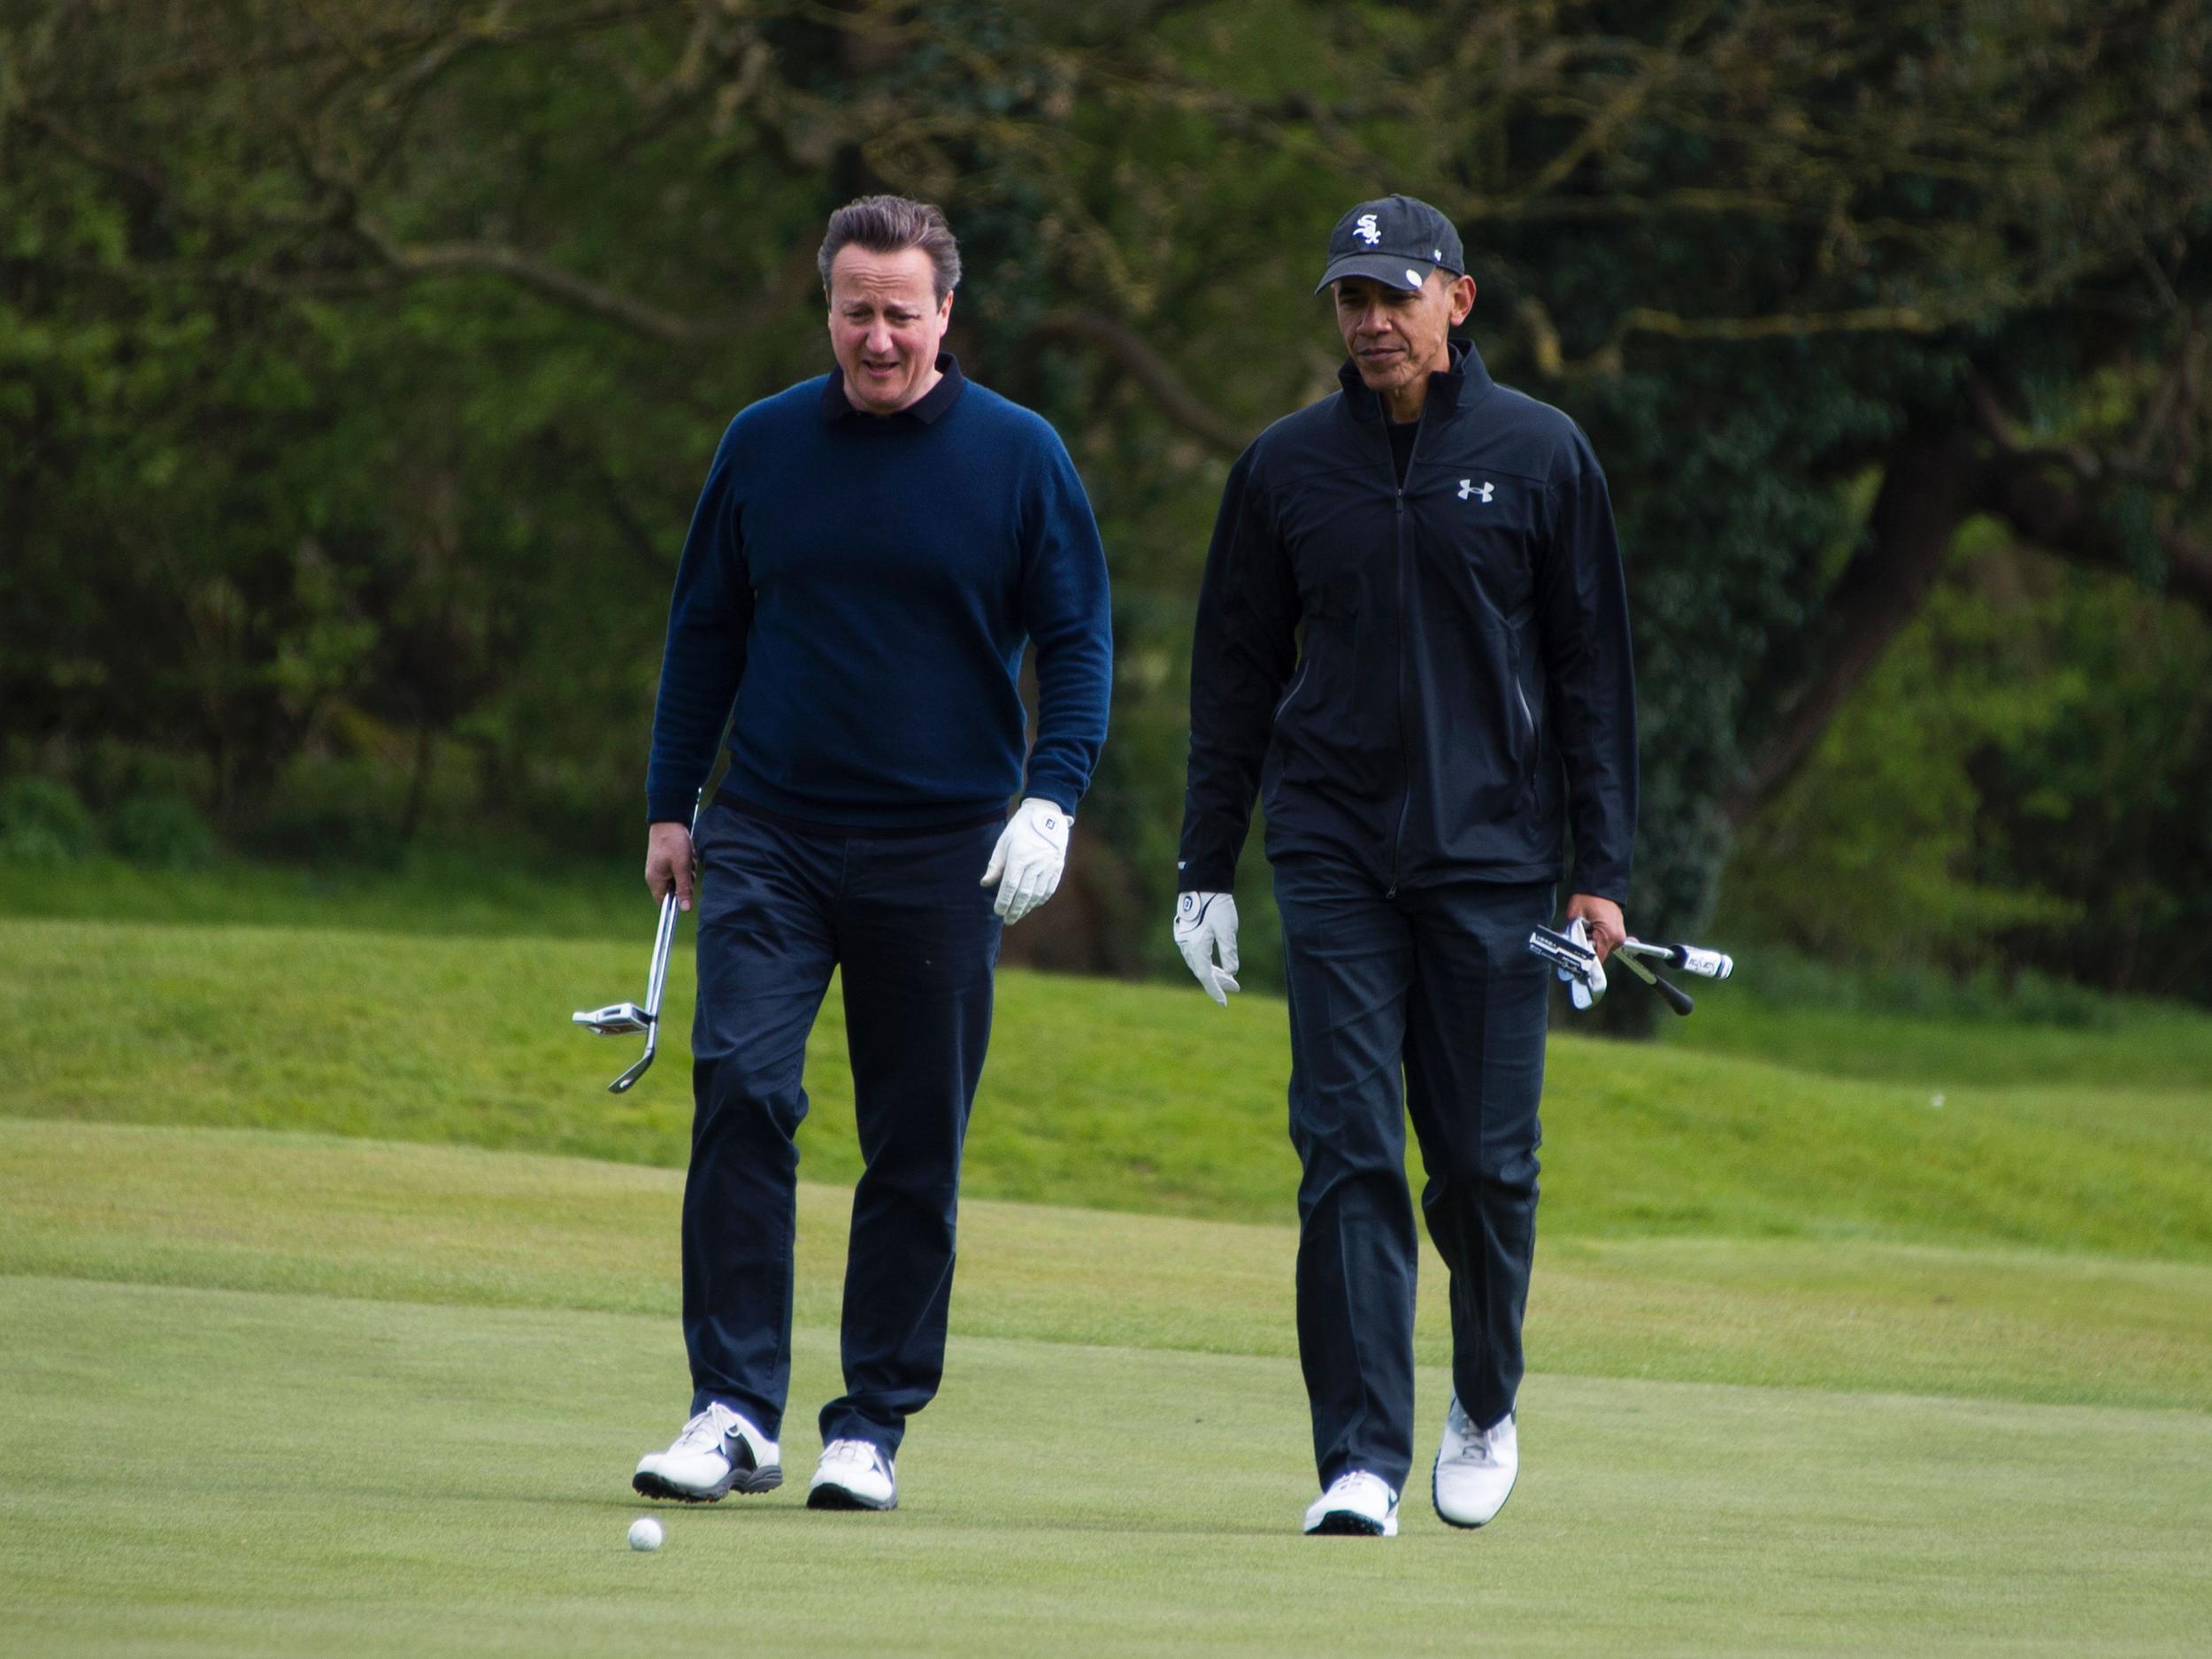 David Cameron and Barack Obama (l-r) squeezed in a round of golf during the US President's three-day visit